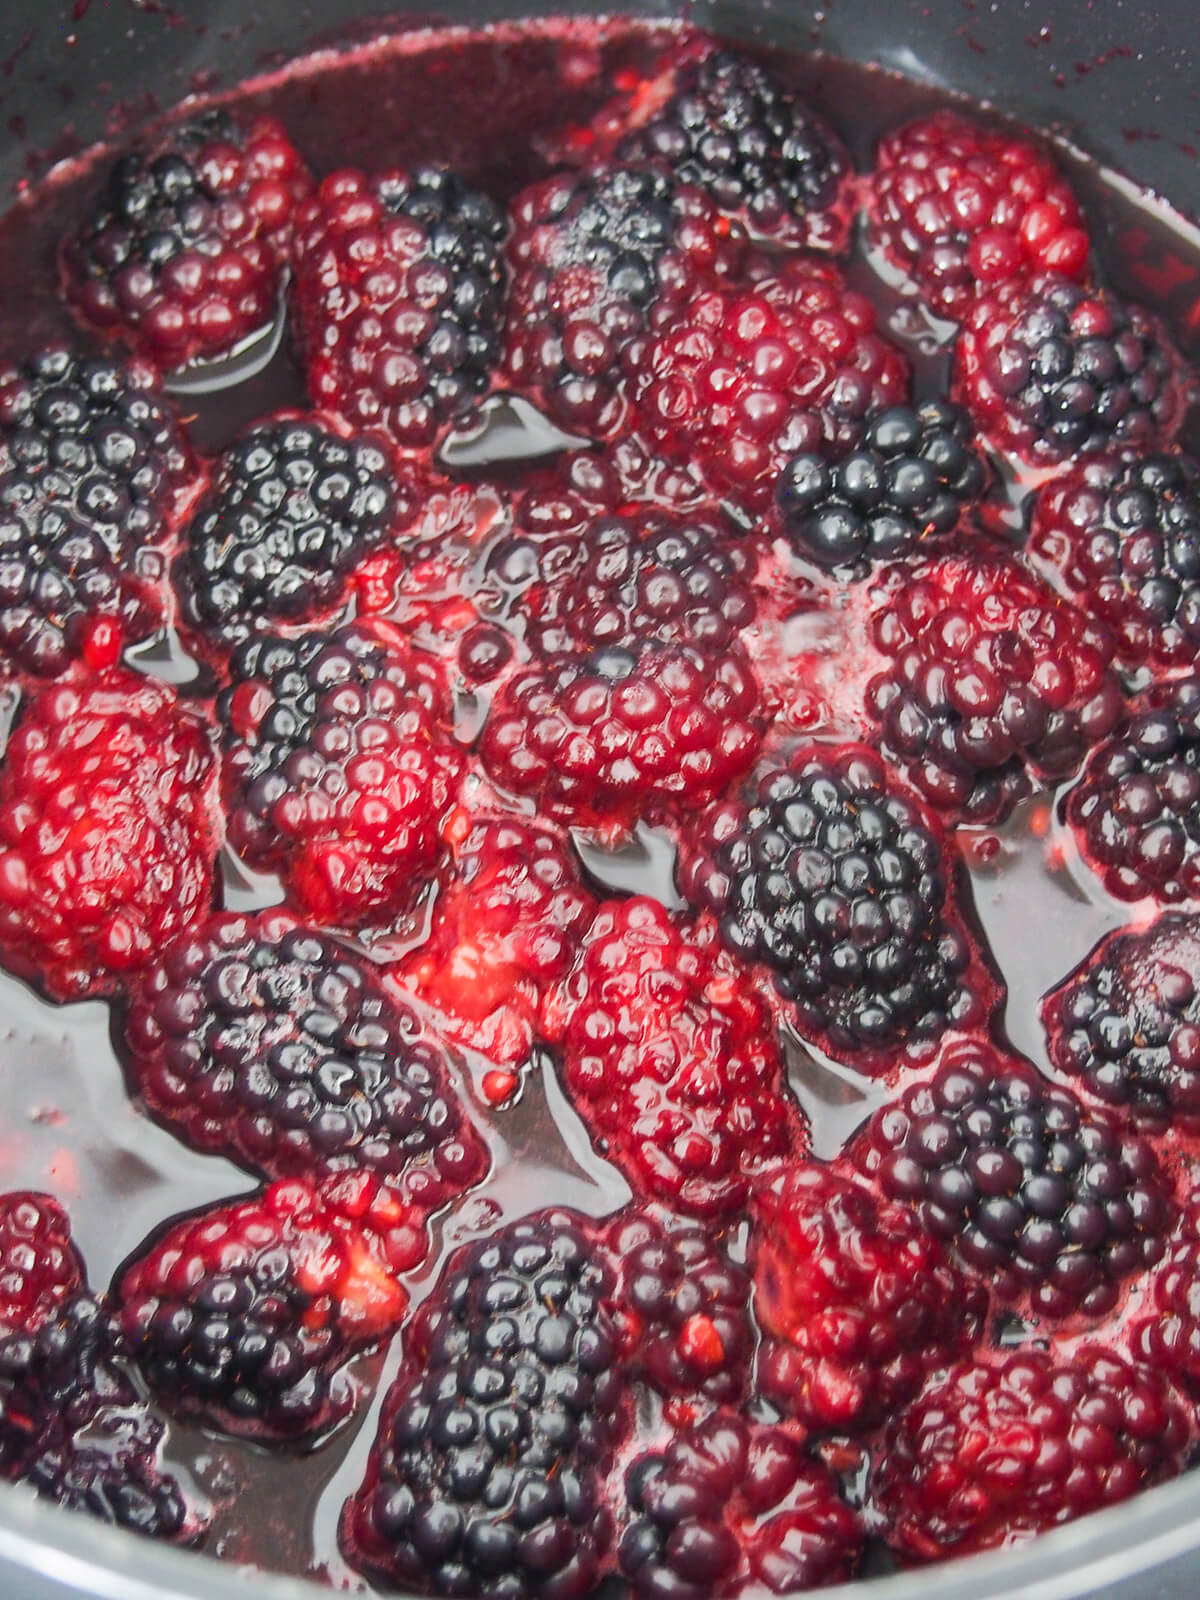 starting to cook jam - blackberries changing color